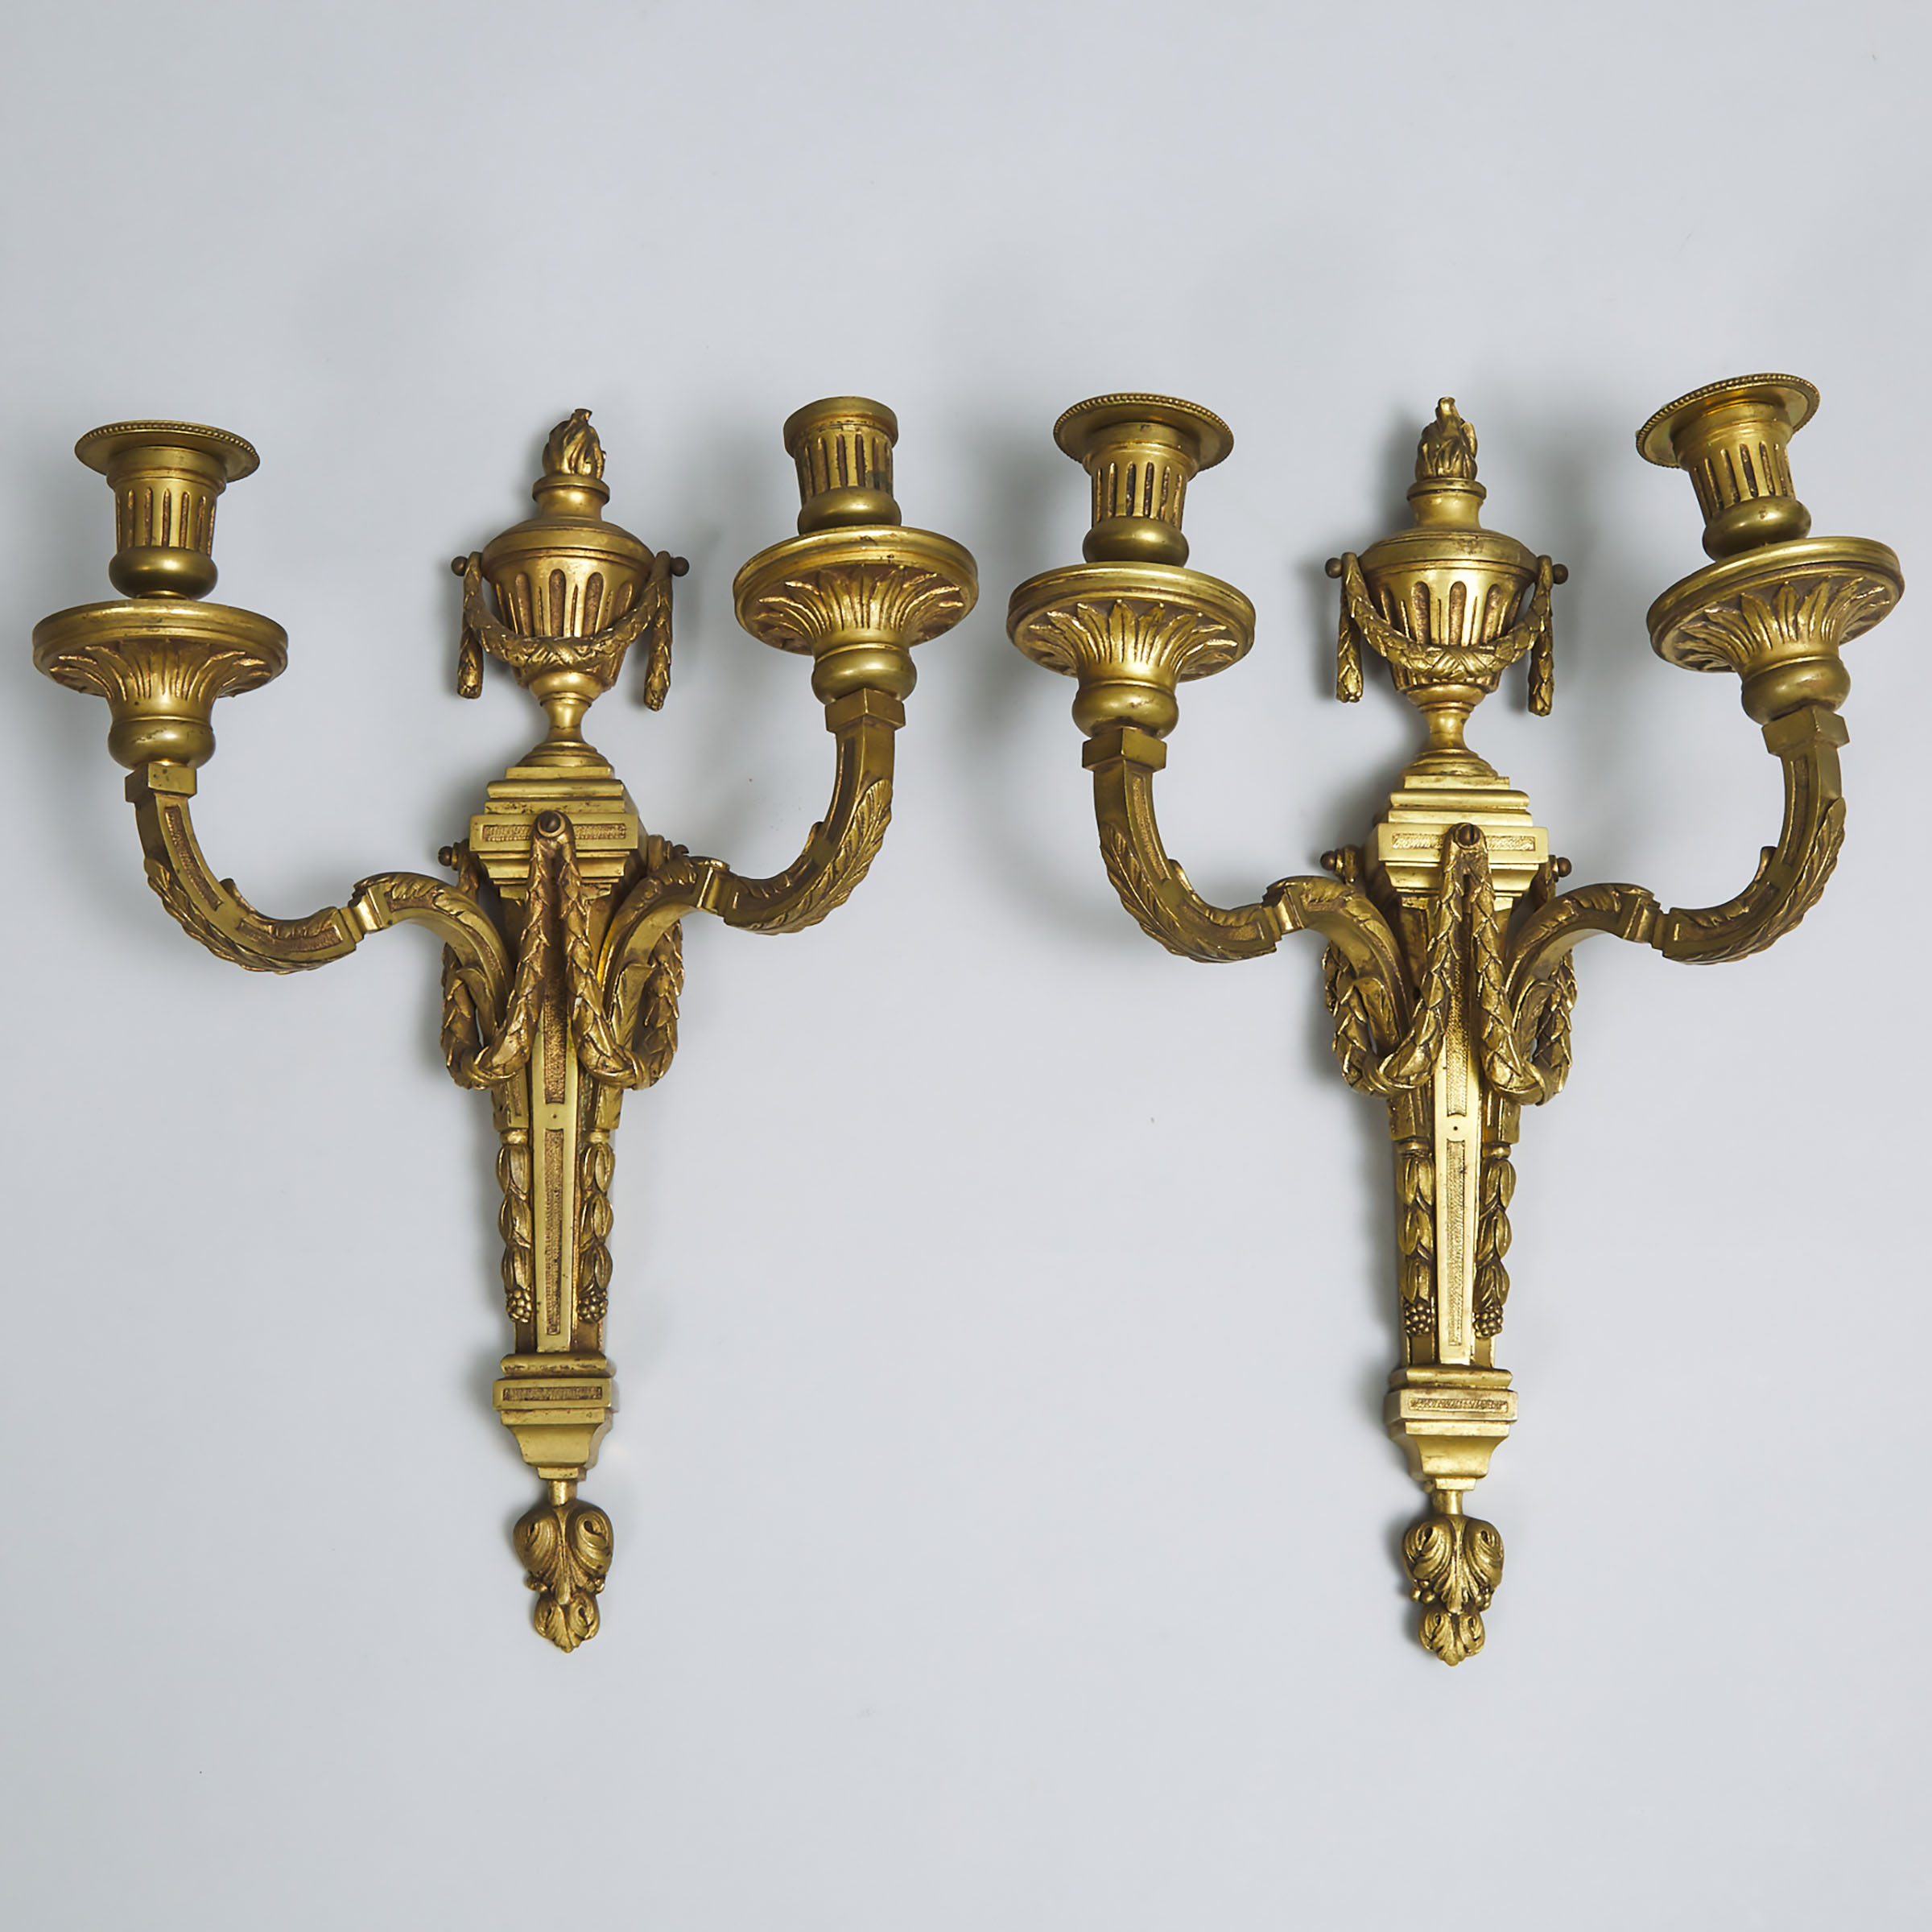 Pair of Louis XVI Style Gilt Bronze Two Candle Wall Sconces, c.1900